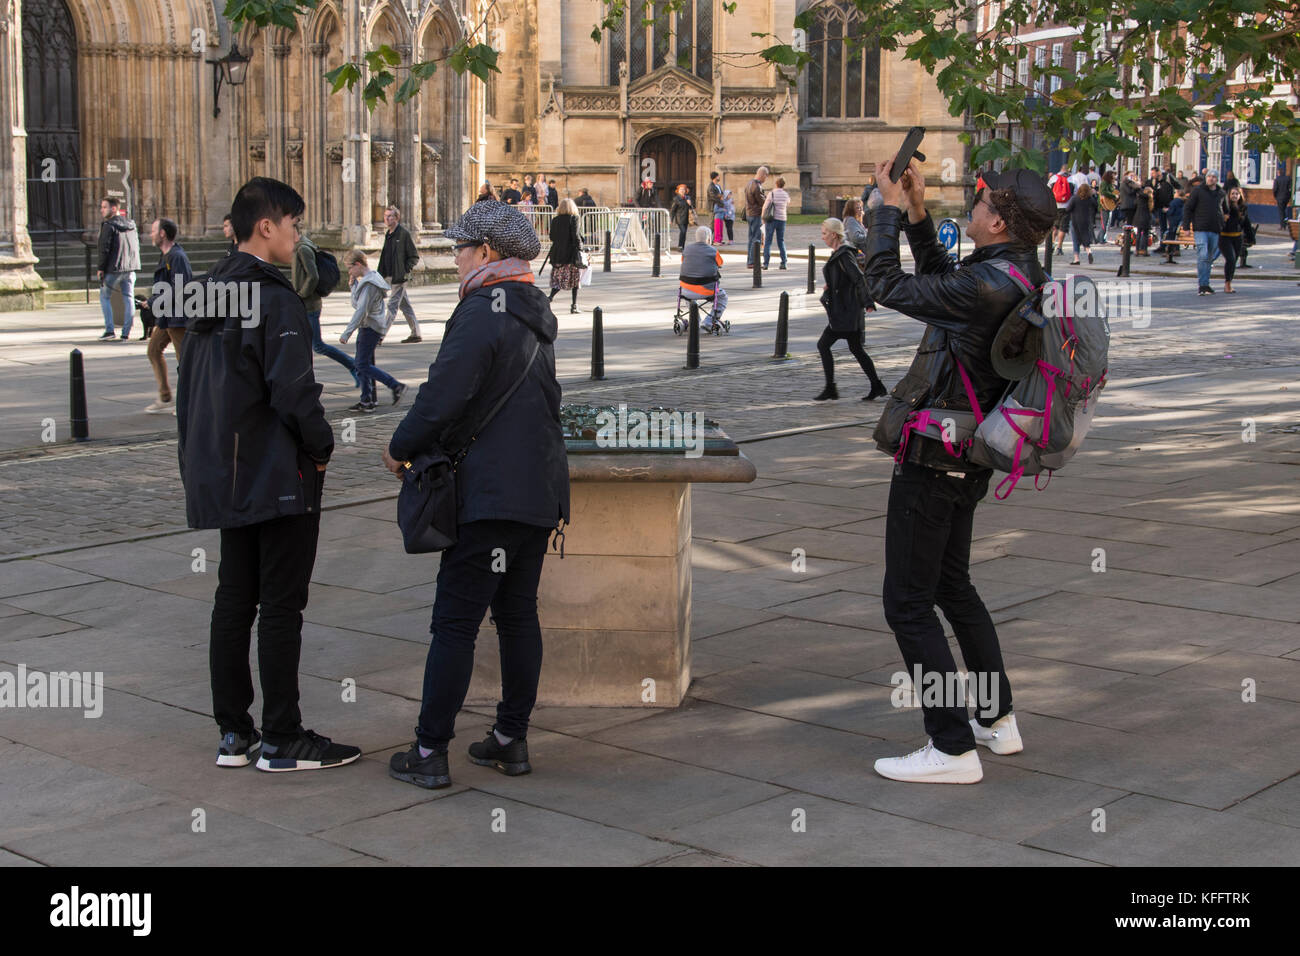 Man takes photo with phone as tourists stand in York centre piazza by model of Minster area, cathedral & people beyond - North Yorkshire, England, UK. Stock Photo